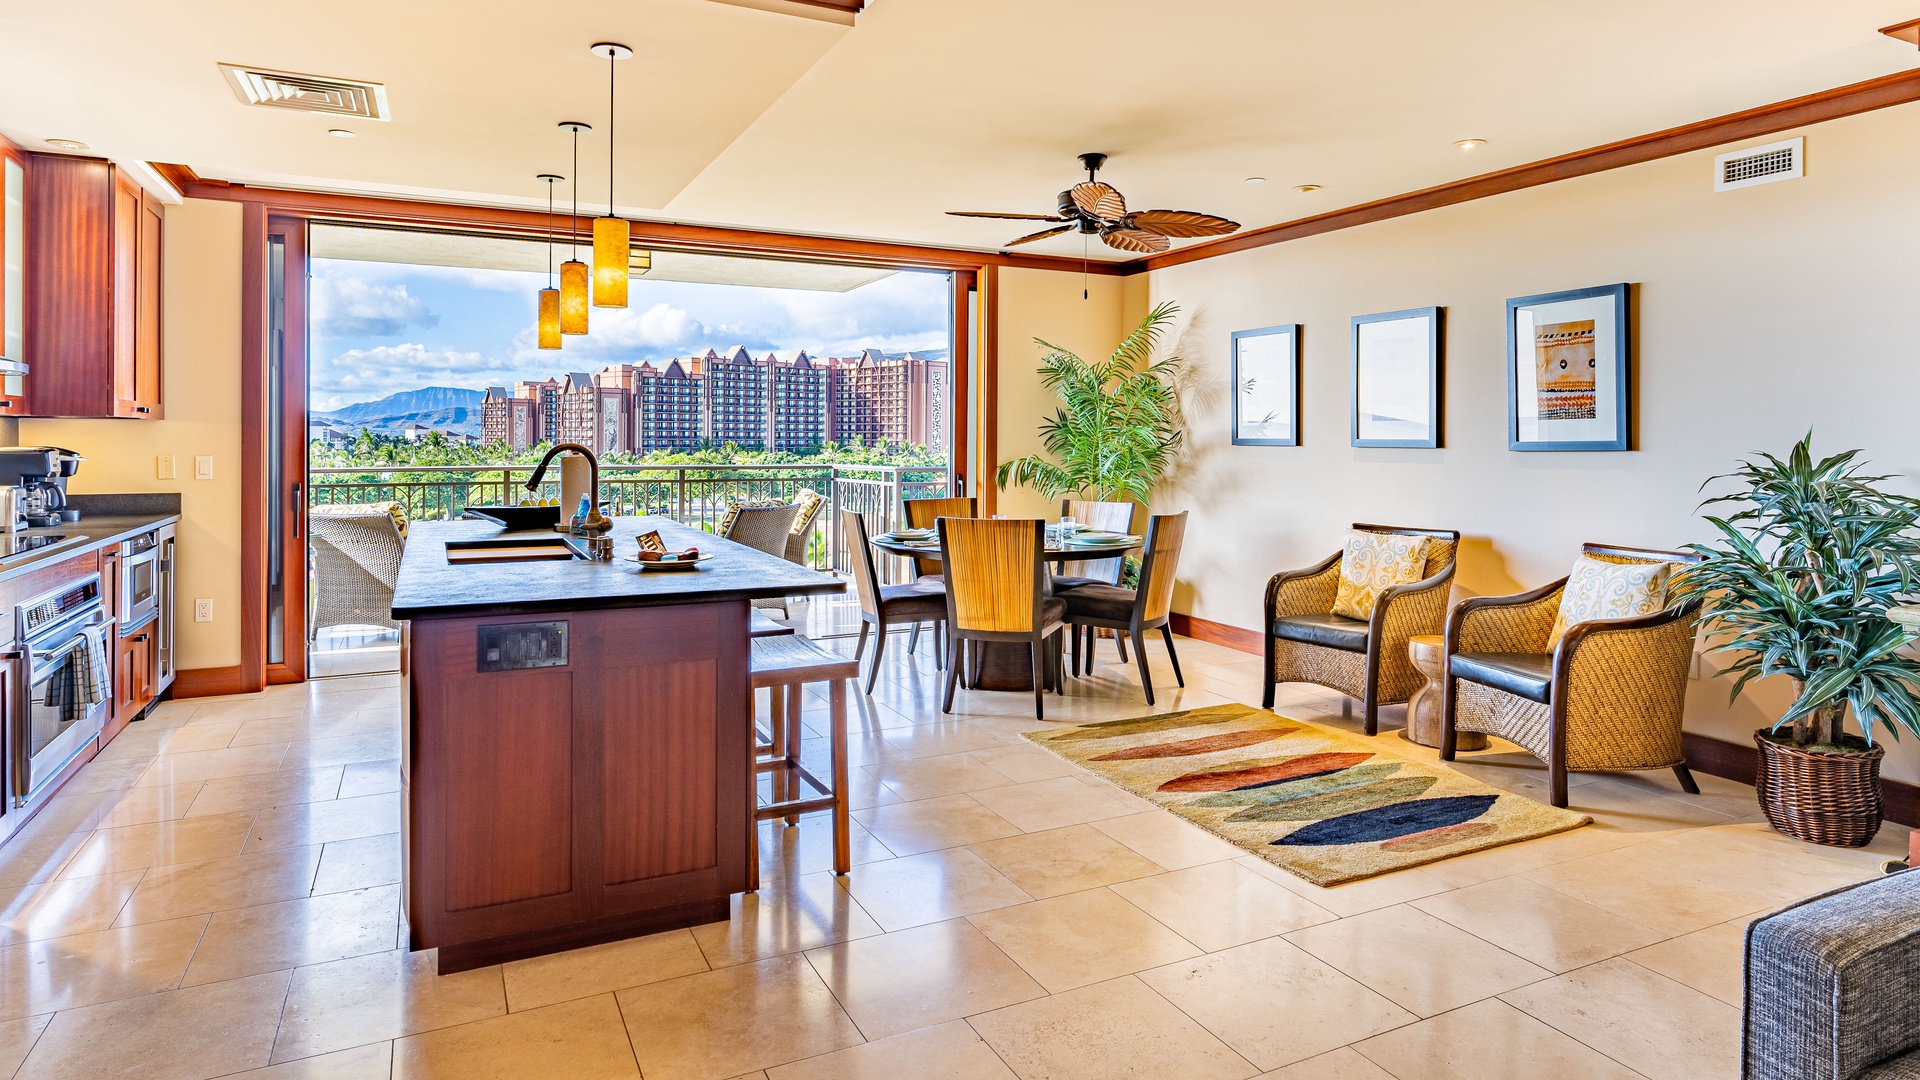 Kapolei Vacation Rentals, Ko Olina Beach Villas B706 - This perfectly decorated kitchen, dining and living area has the brightest panoramic views.